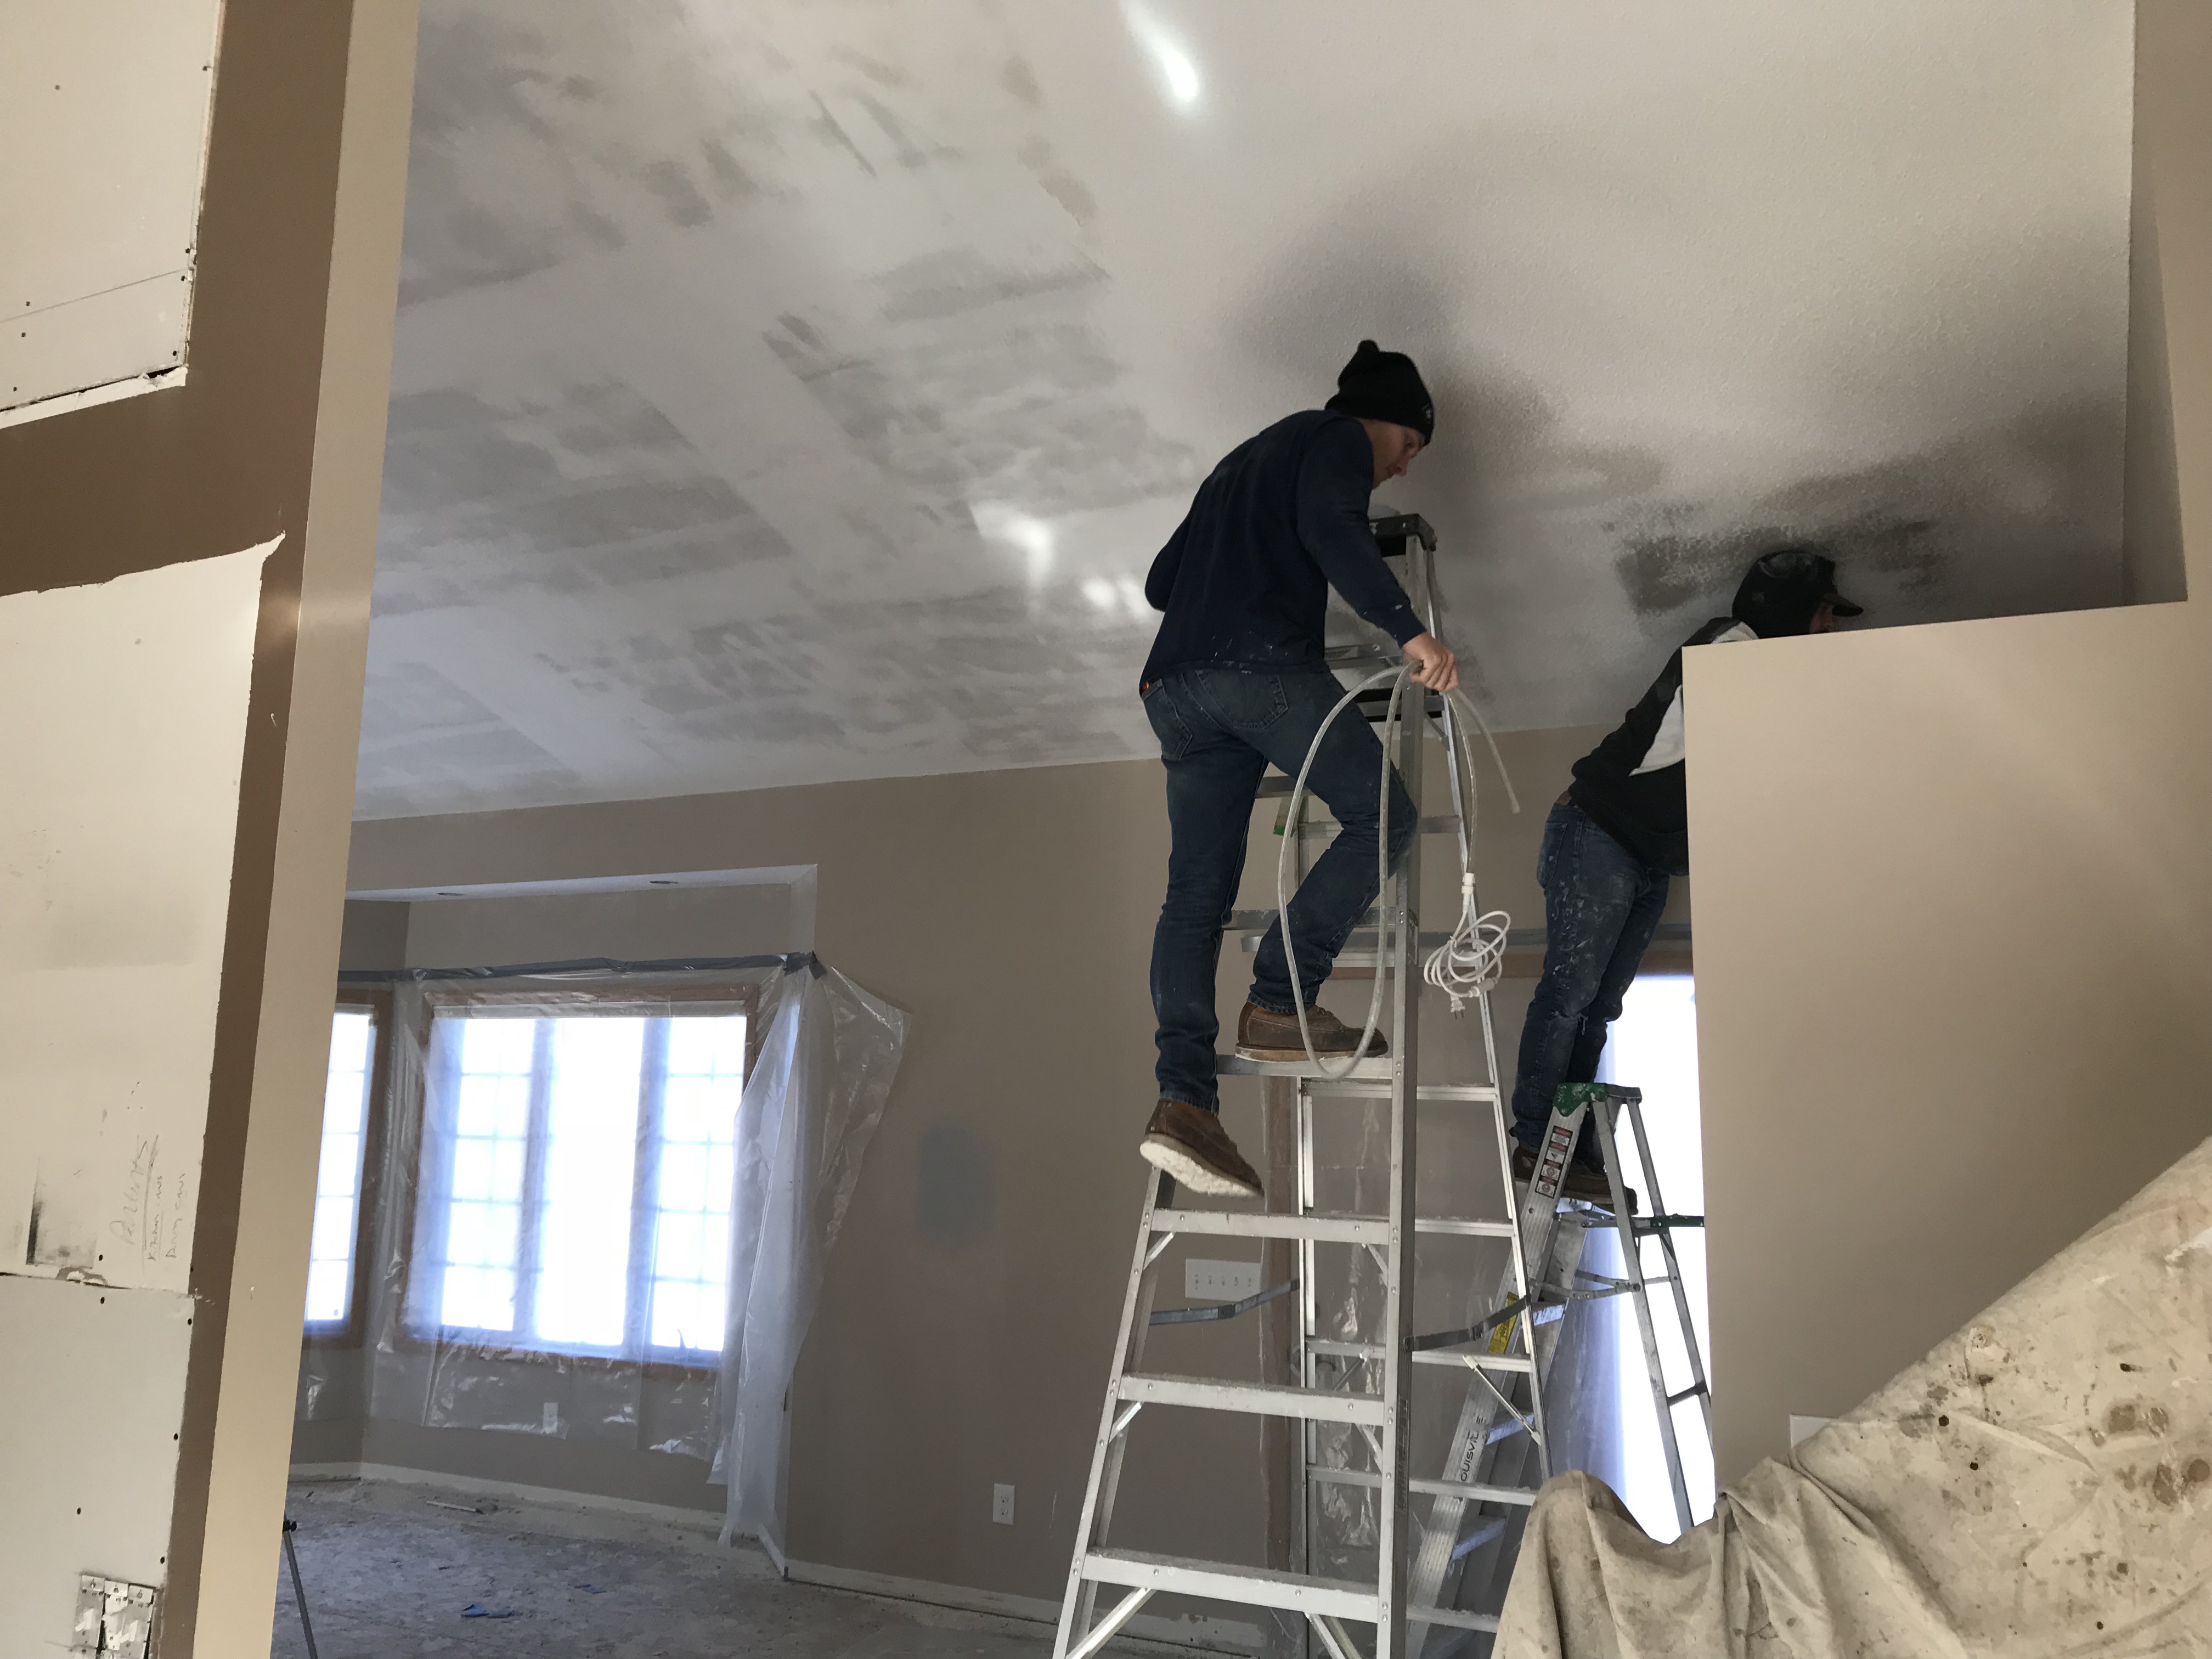 How To Remove Textured Popcorn Ceilings Construction2style